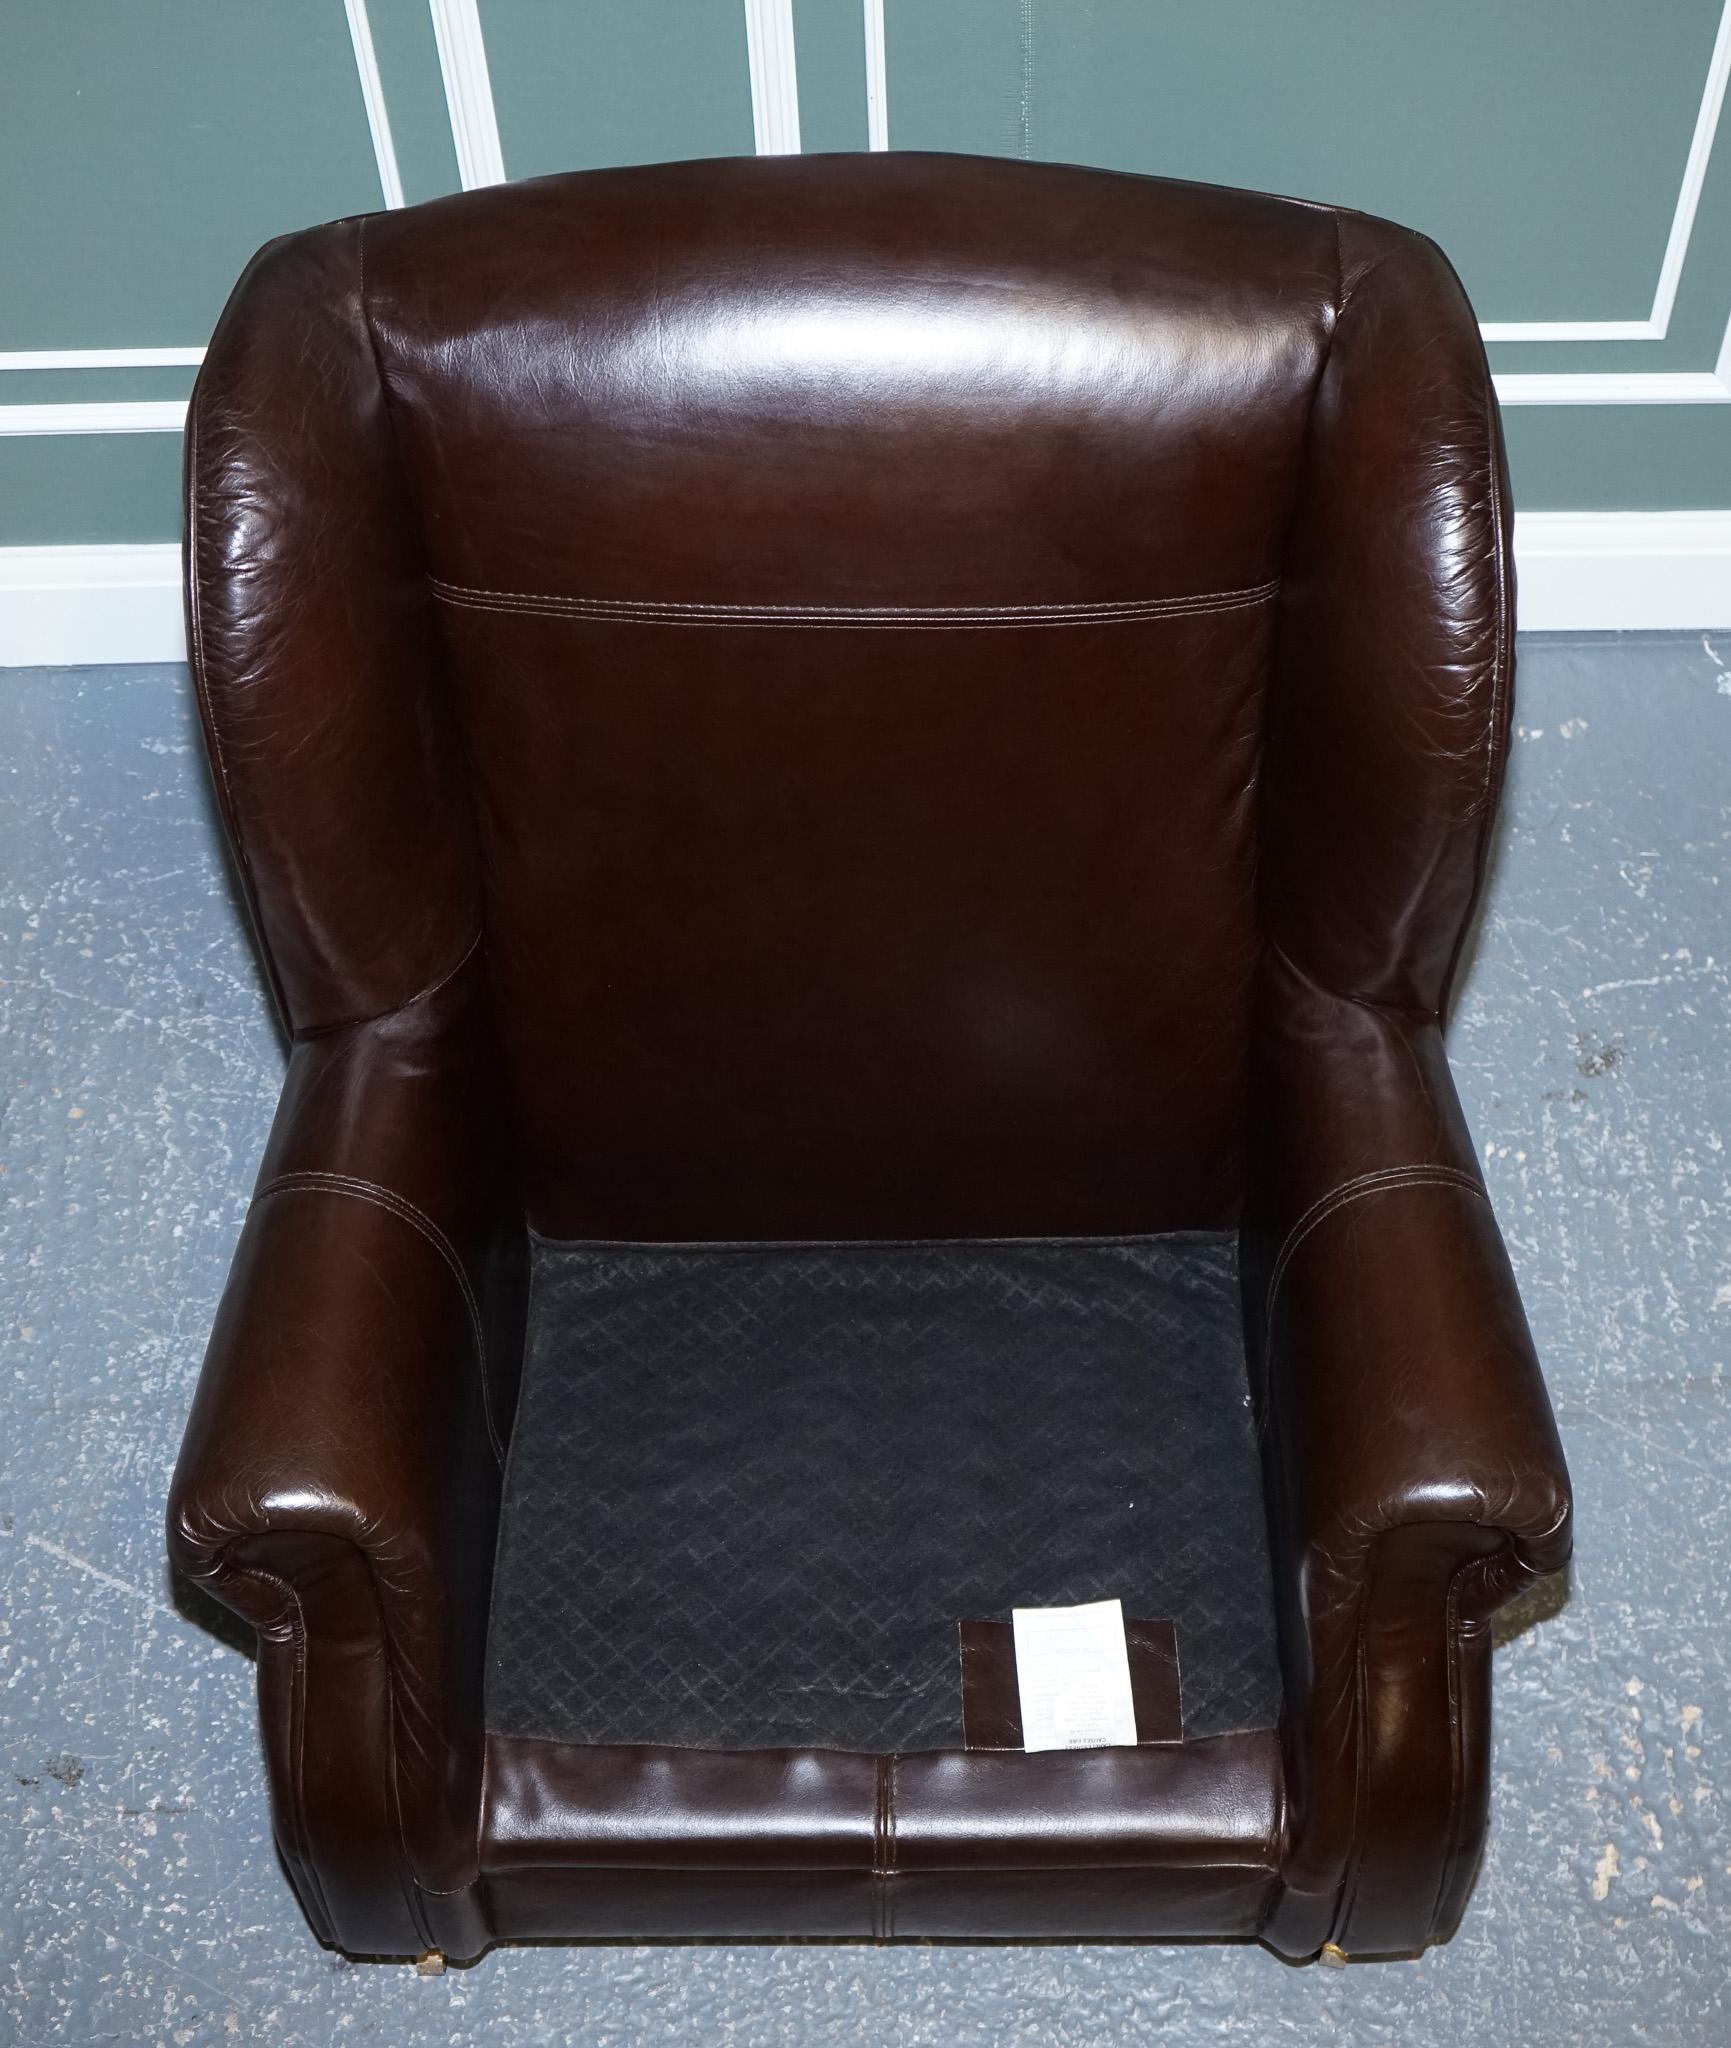 ViNTAGE PAIR OF CHOCOLATE BROWN LEATHER WINGBACK CHAIRS For Sale 8